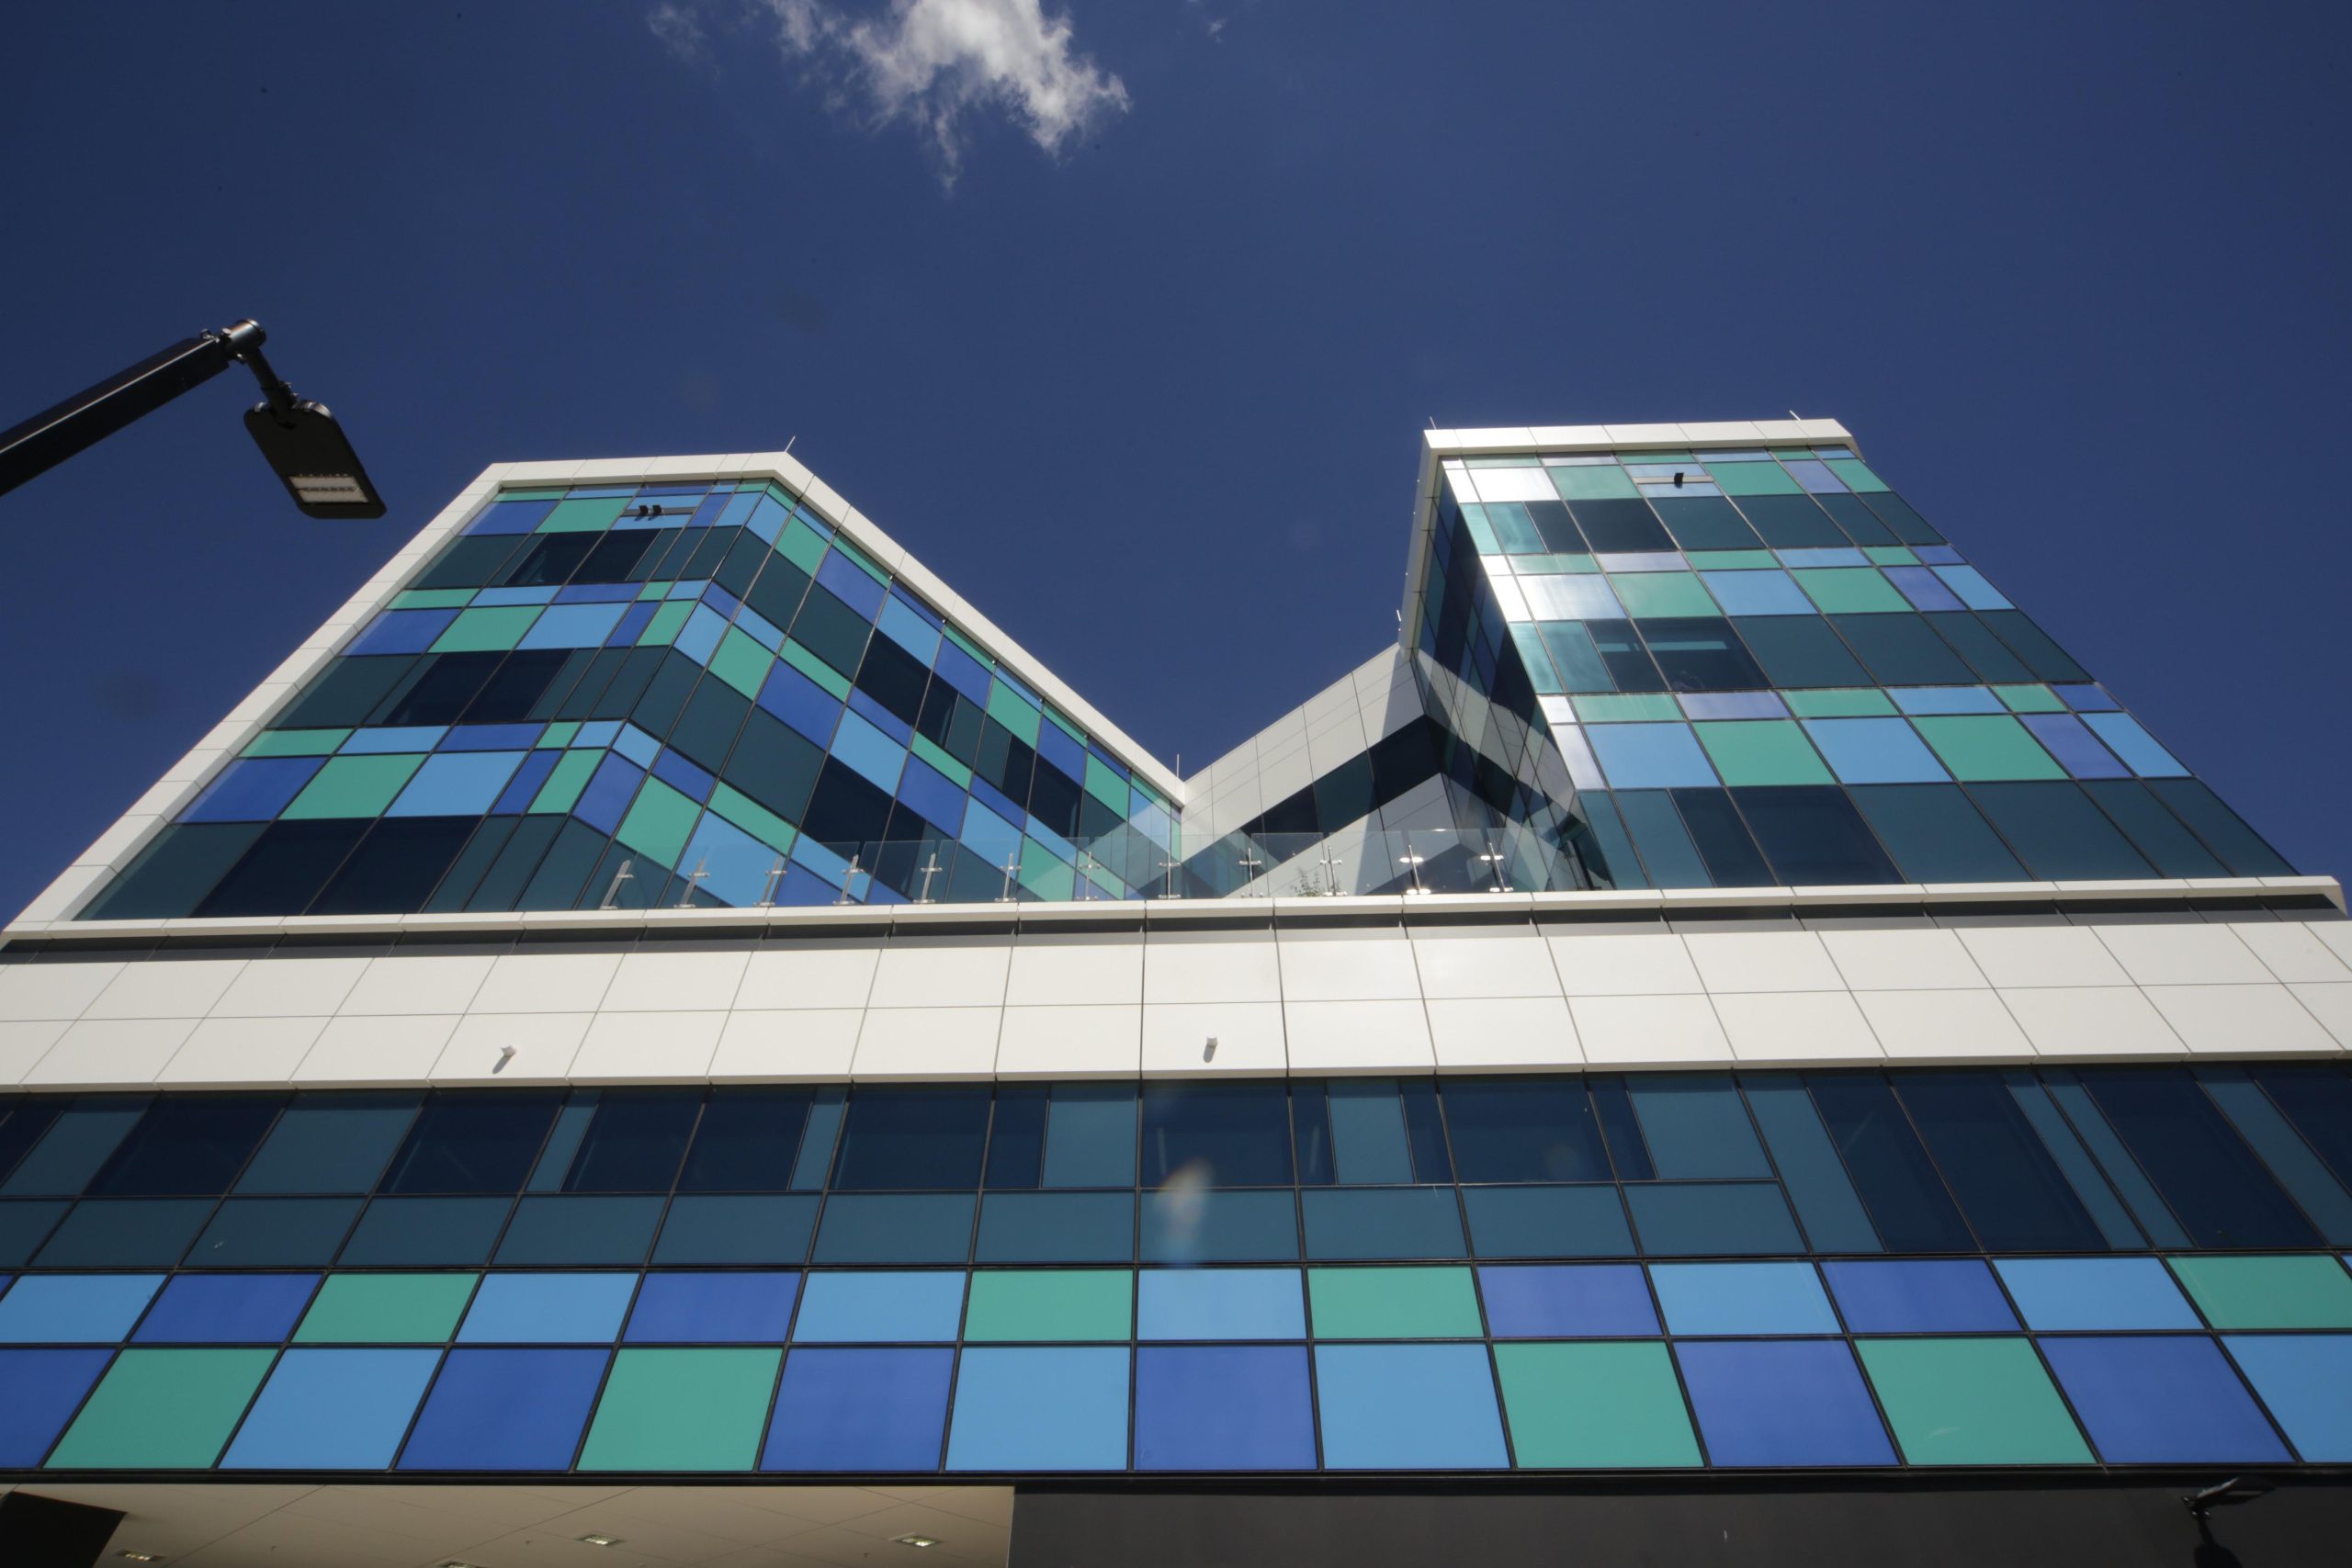 Viridian Glass – What Architects say about glass?